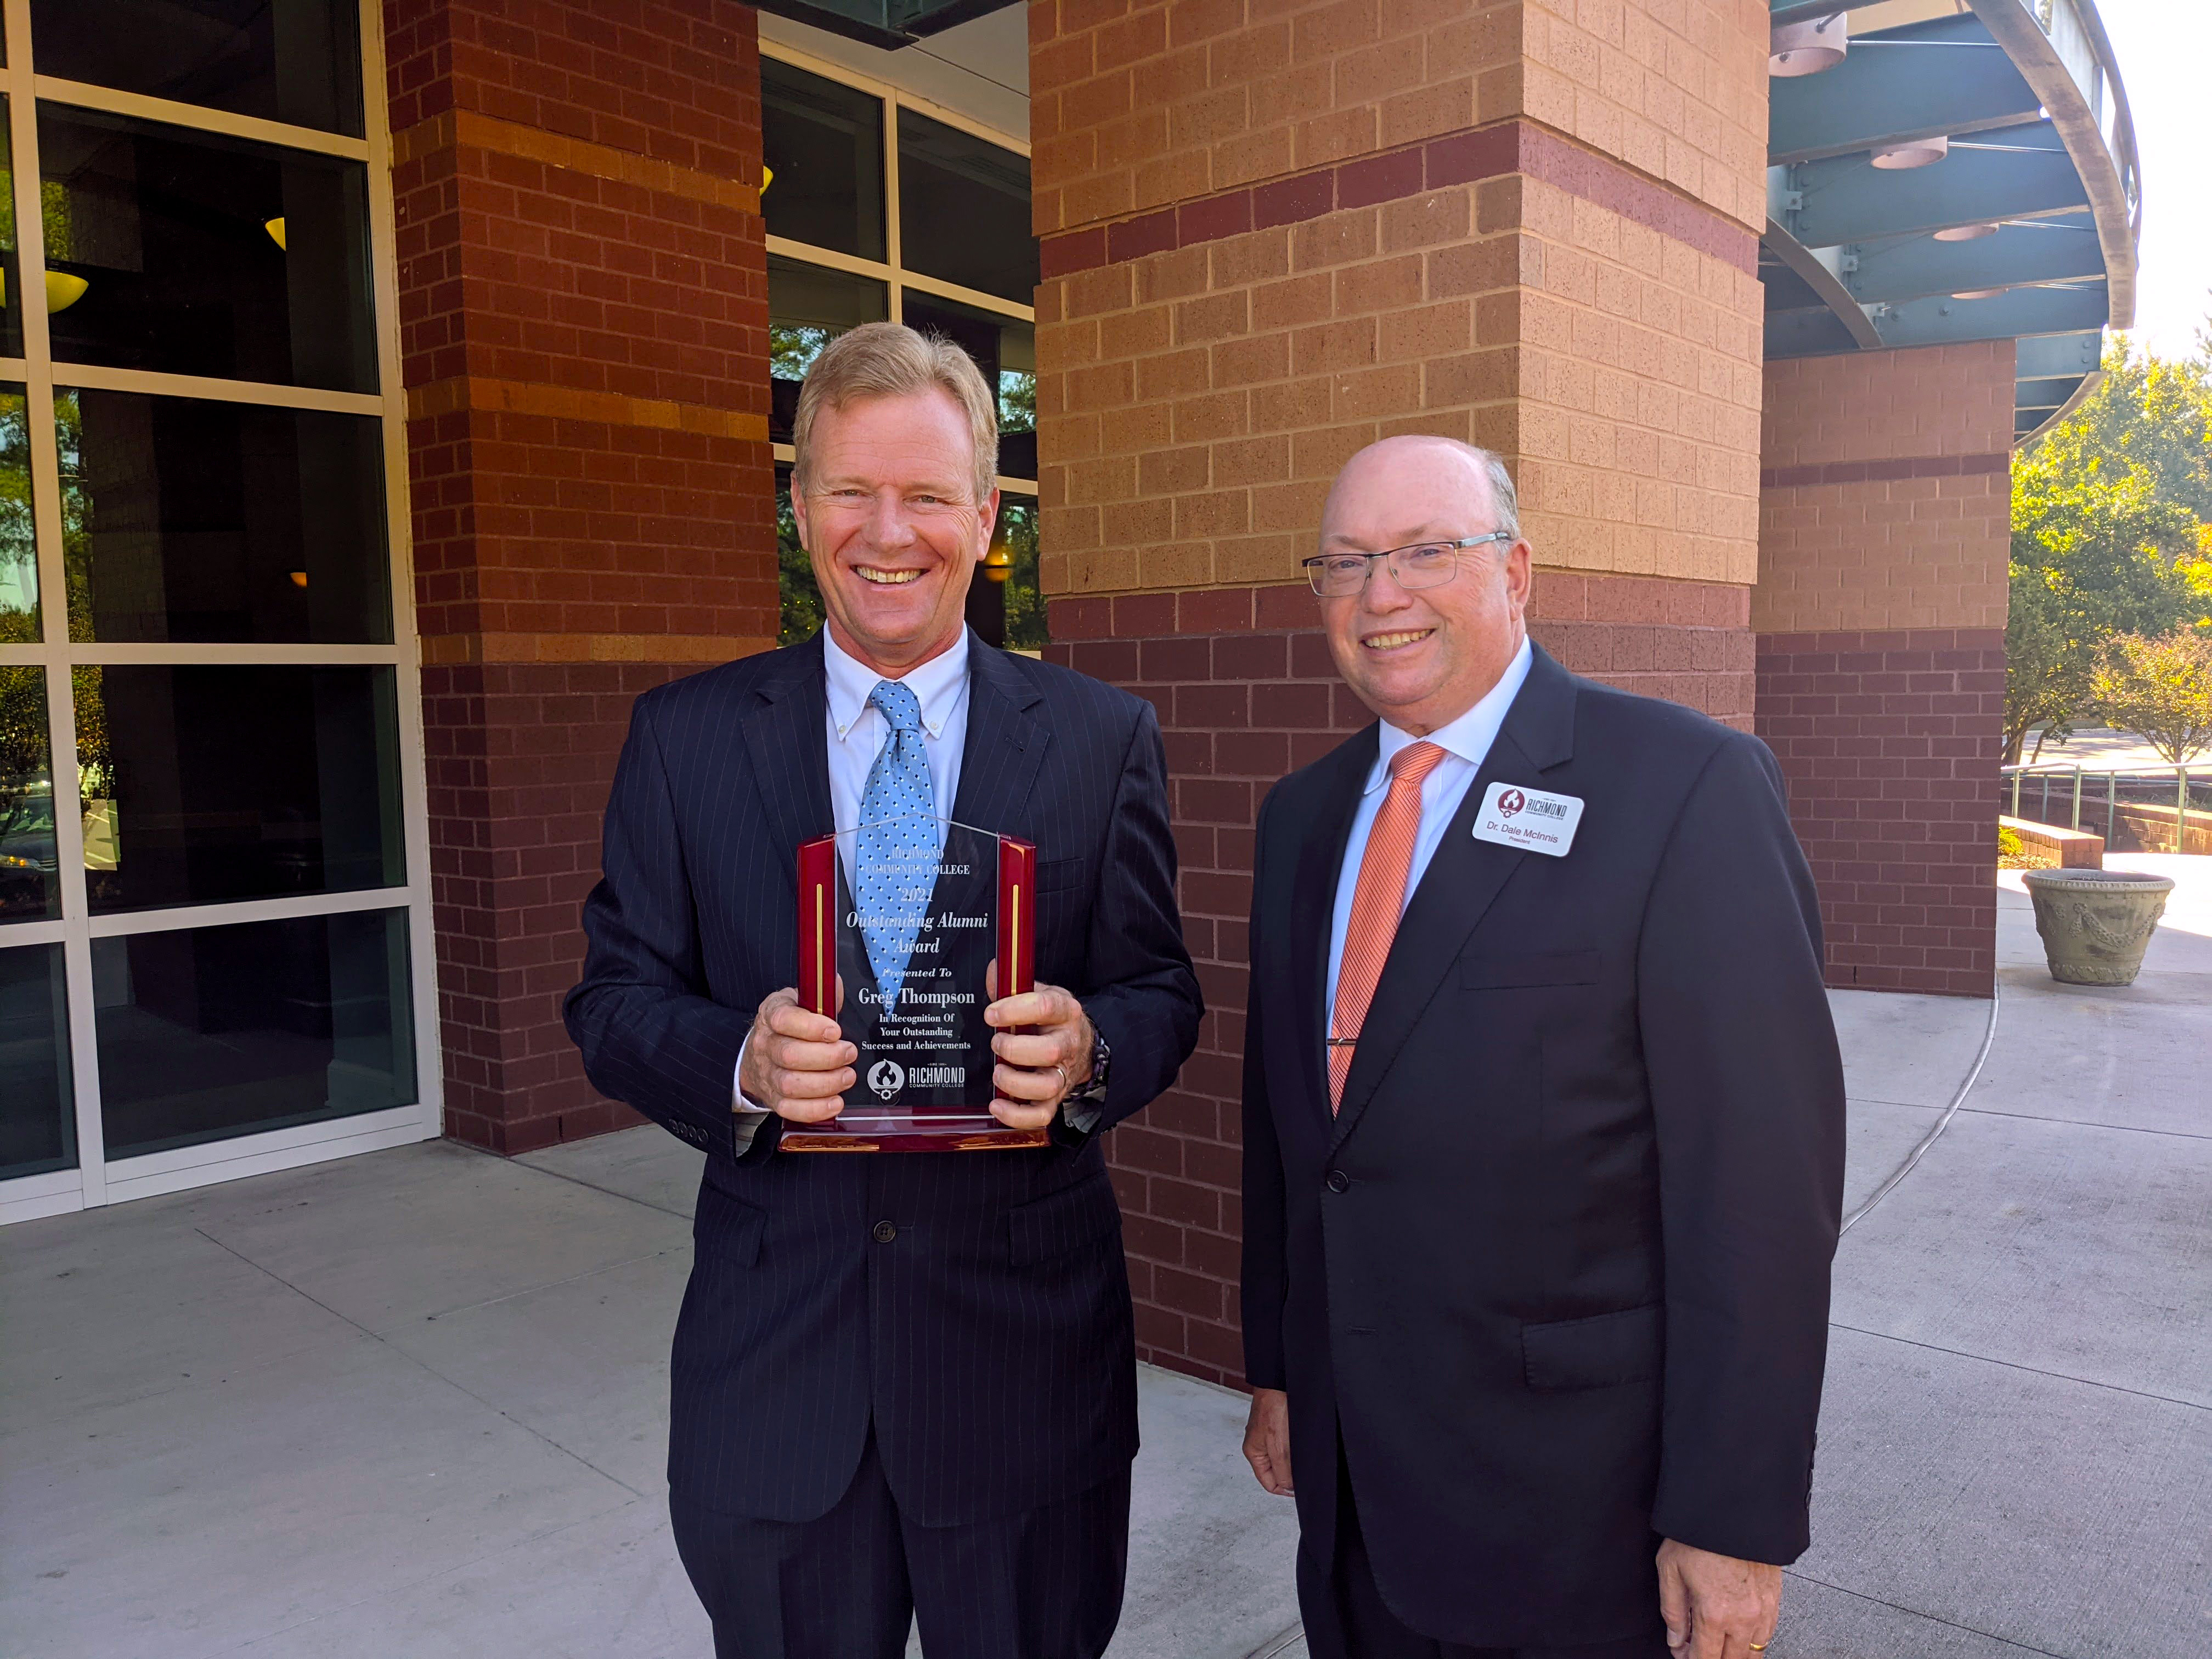 Greg Thompson holds award while standing with RCC president